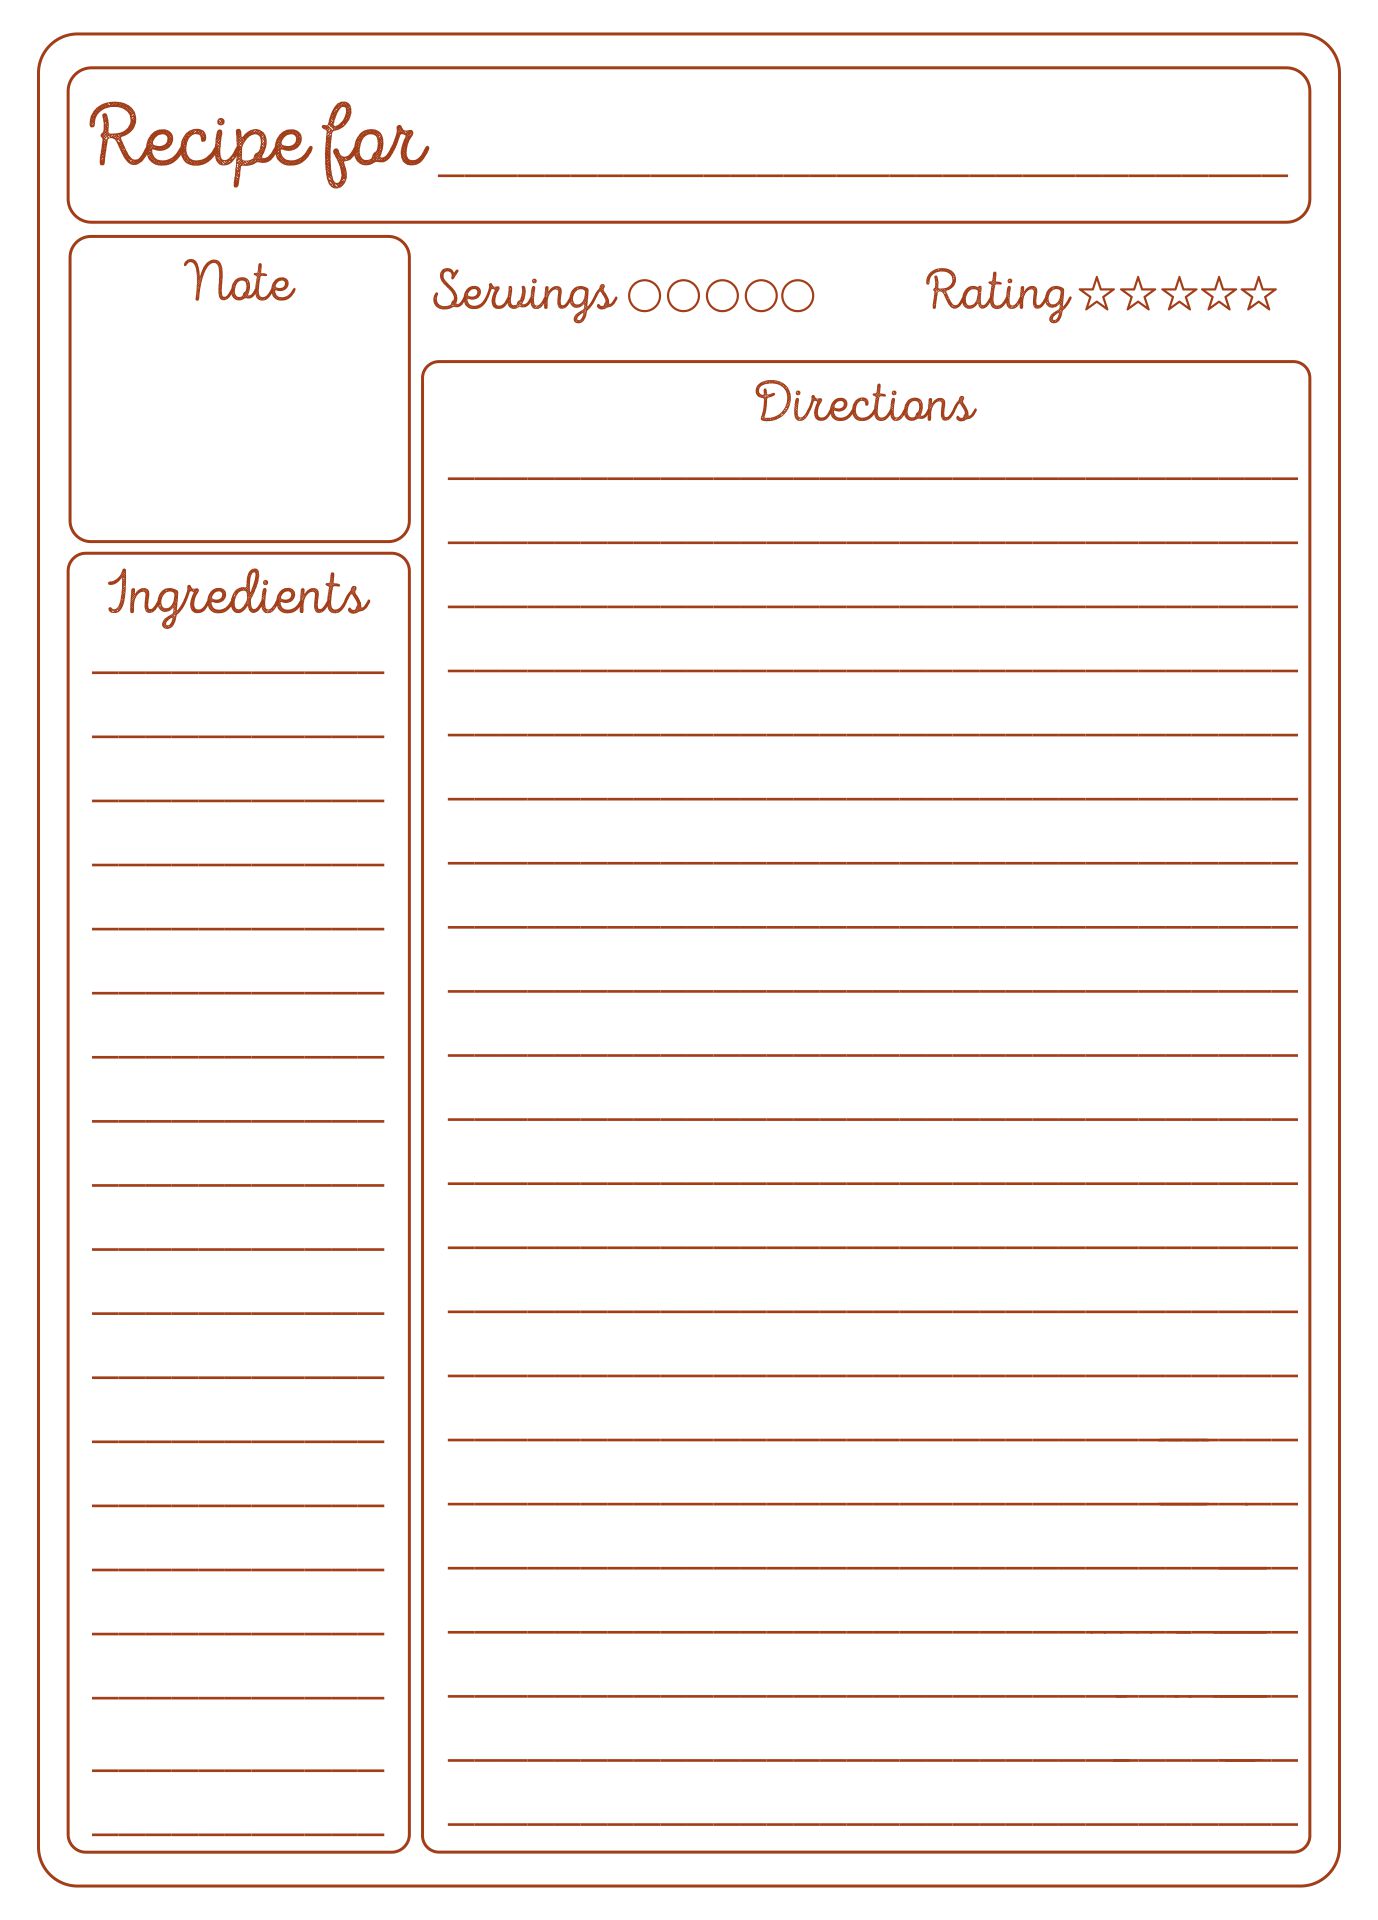 9 Best Images of Blank Printable Recipe Cards - Blank Recipe Card